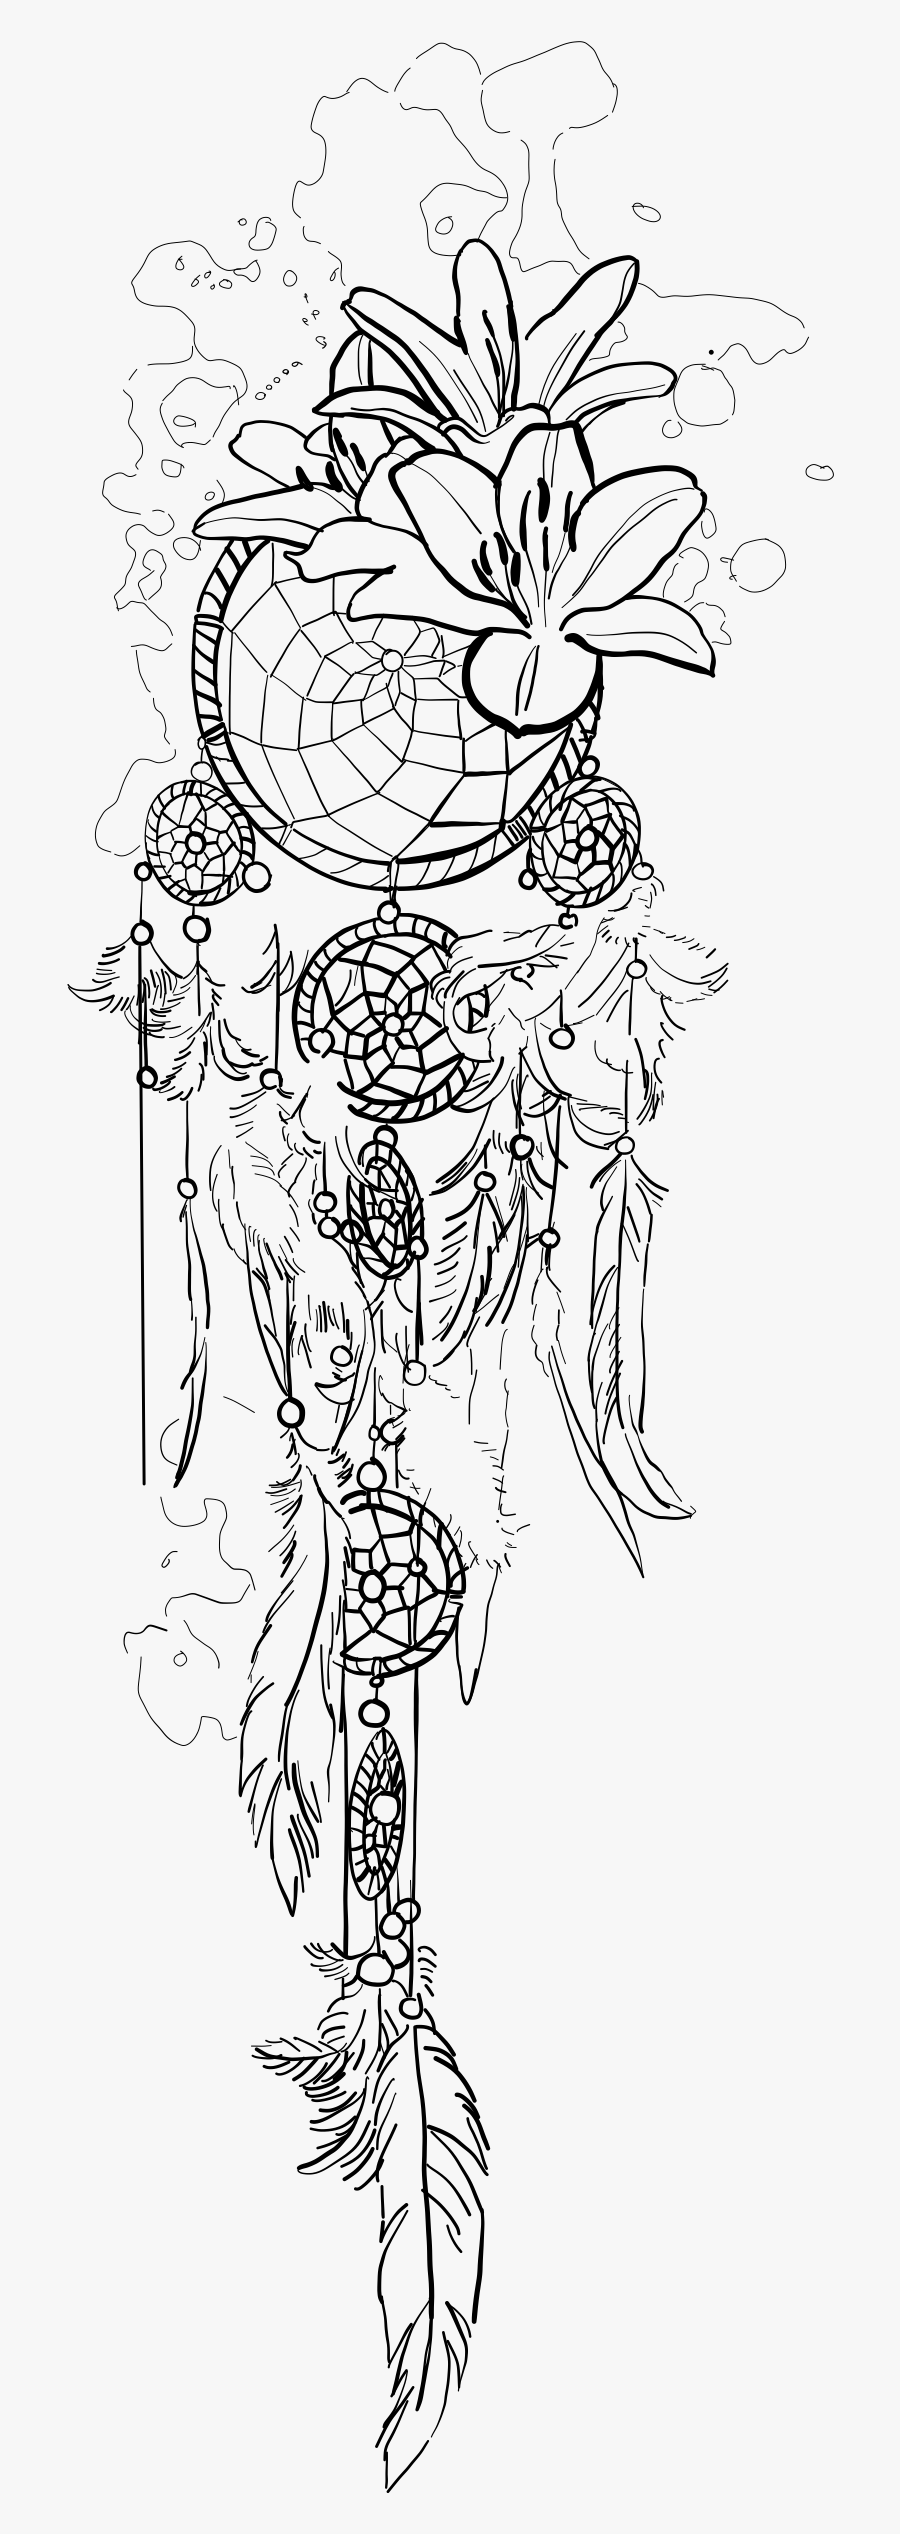 Pin By Leanne Hoffman On Tattoo Ideas - Realistic Dream Catcher Drawing, Transparent Clipart